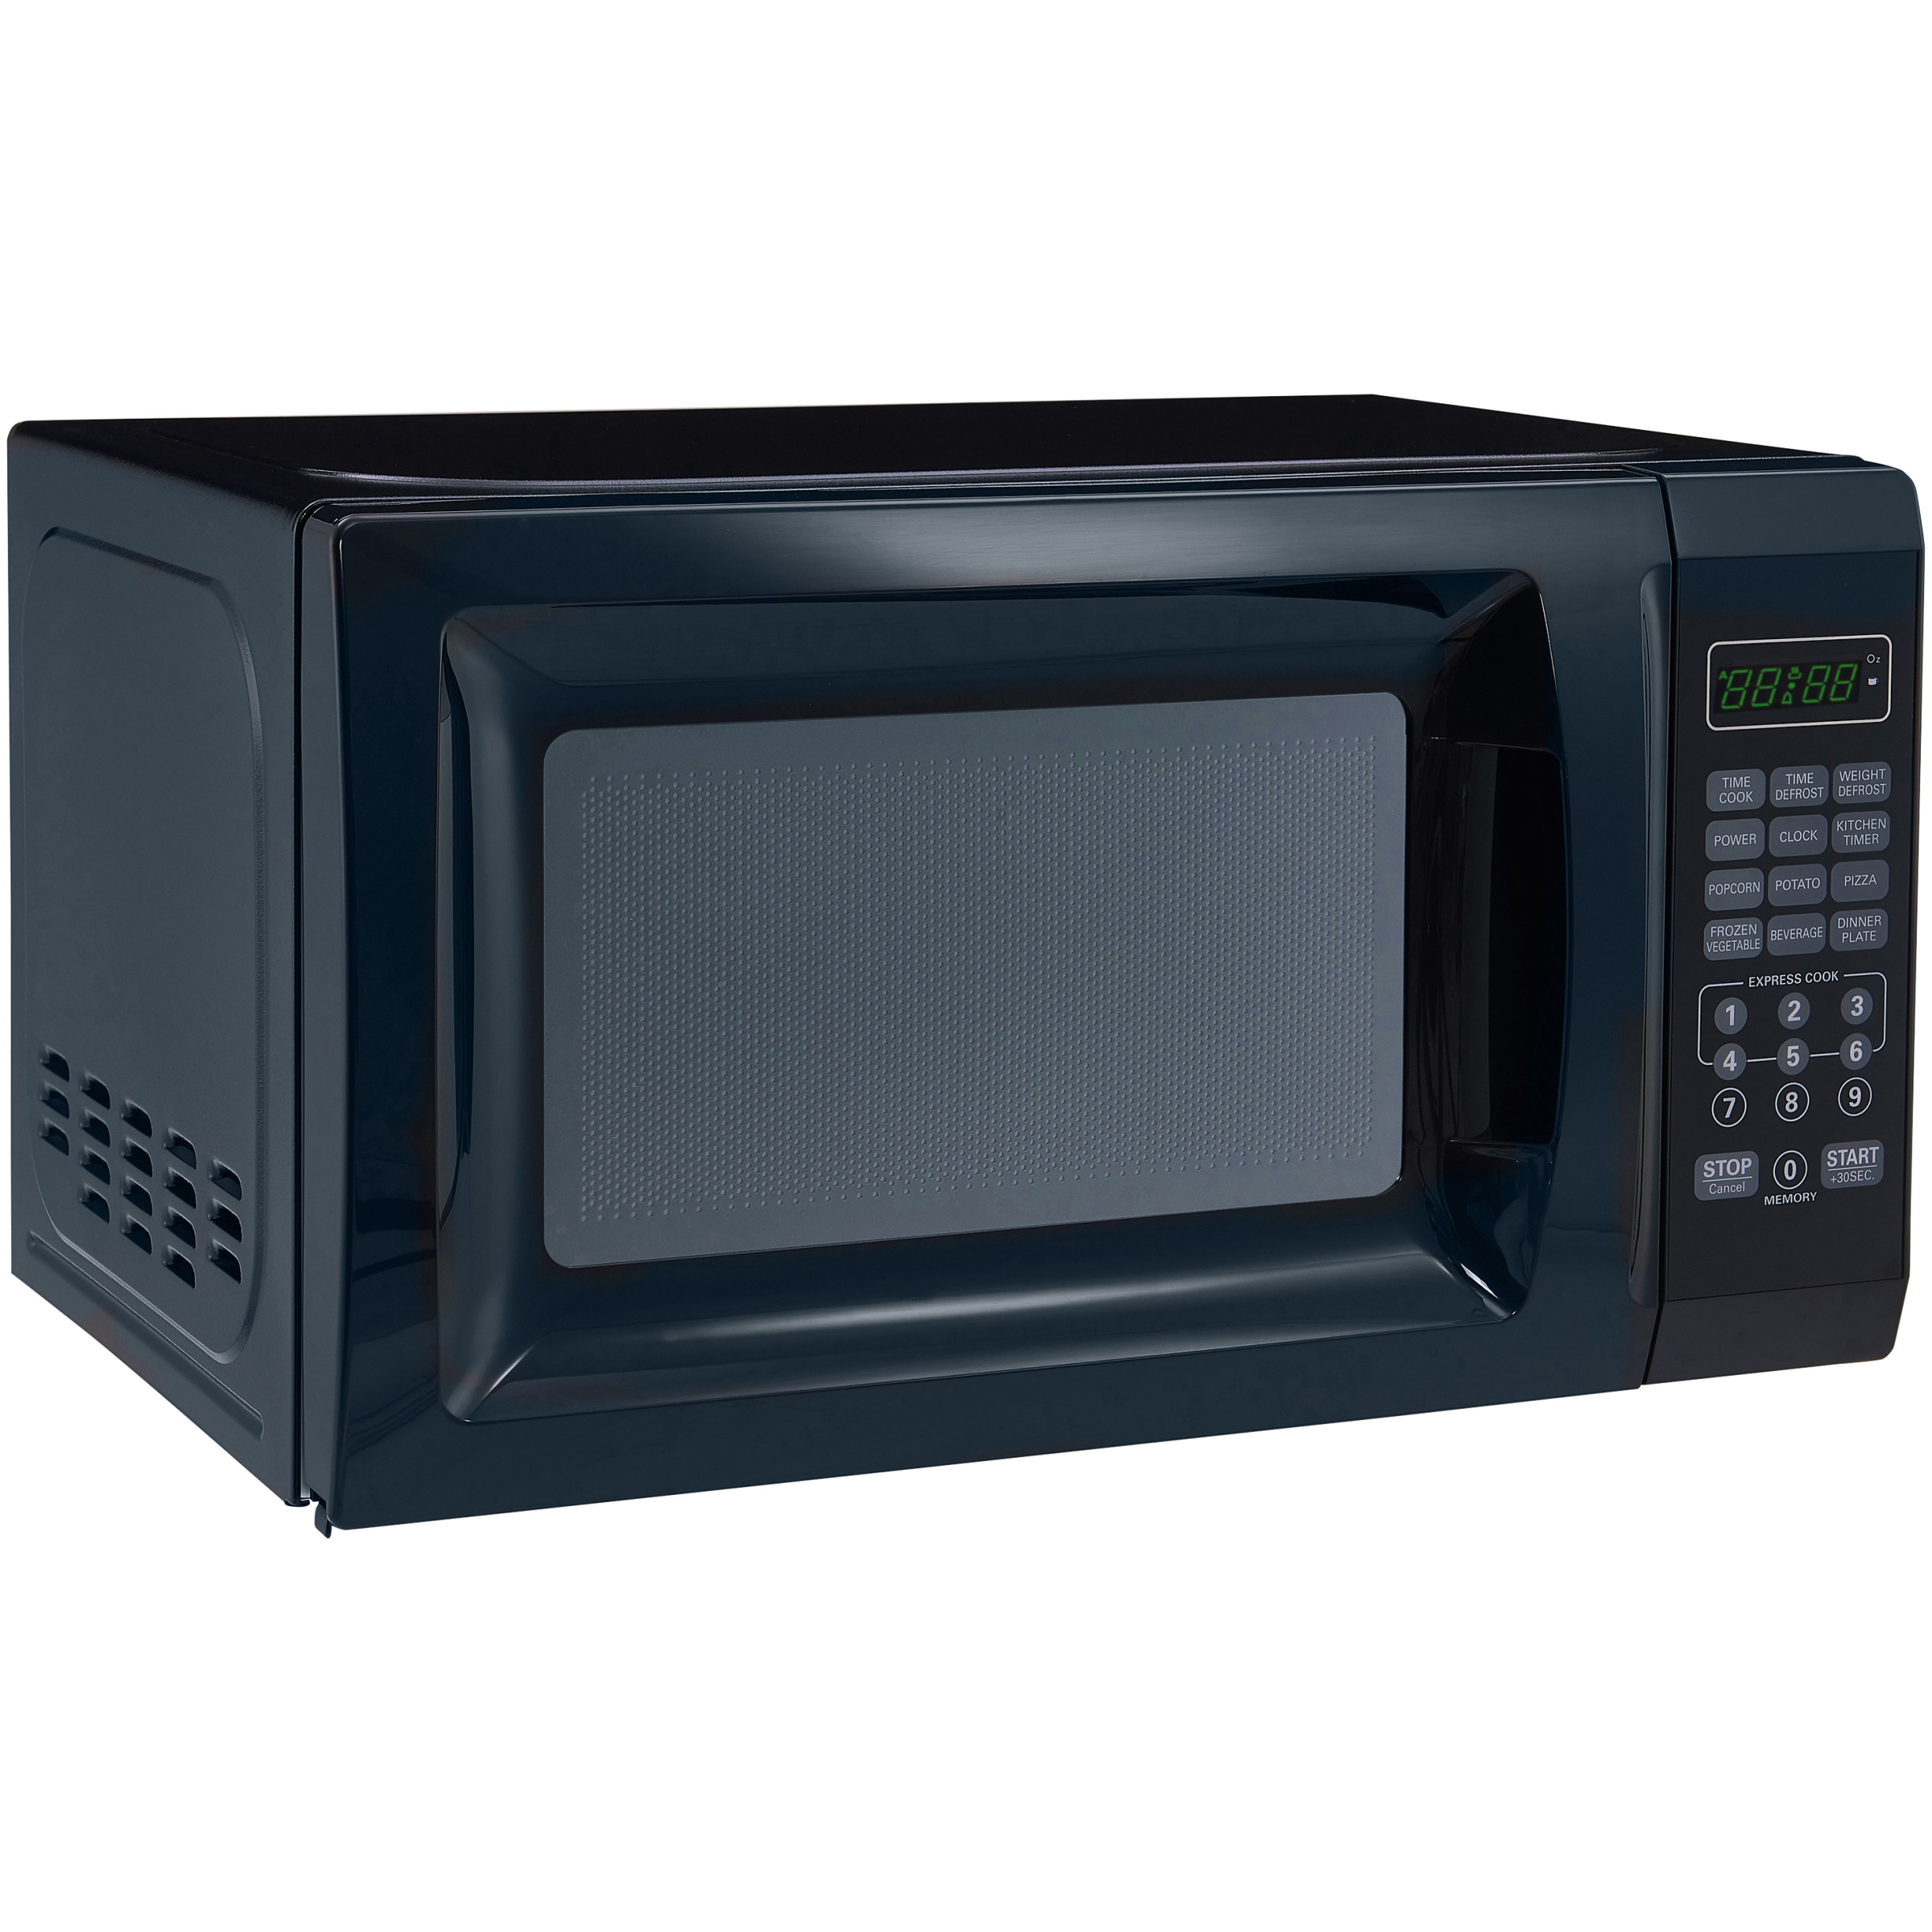 Mainstays 0.7 Cu. Ft. 700W Black Microwave Oven - image 5 of 7